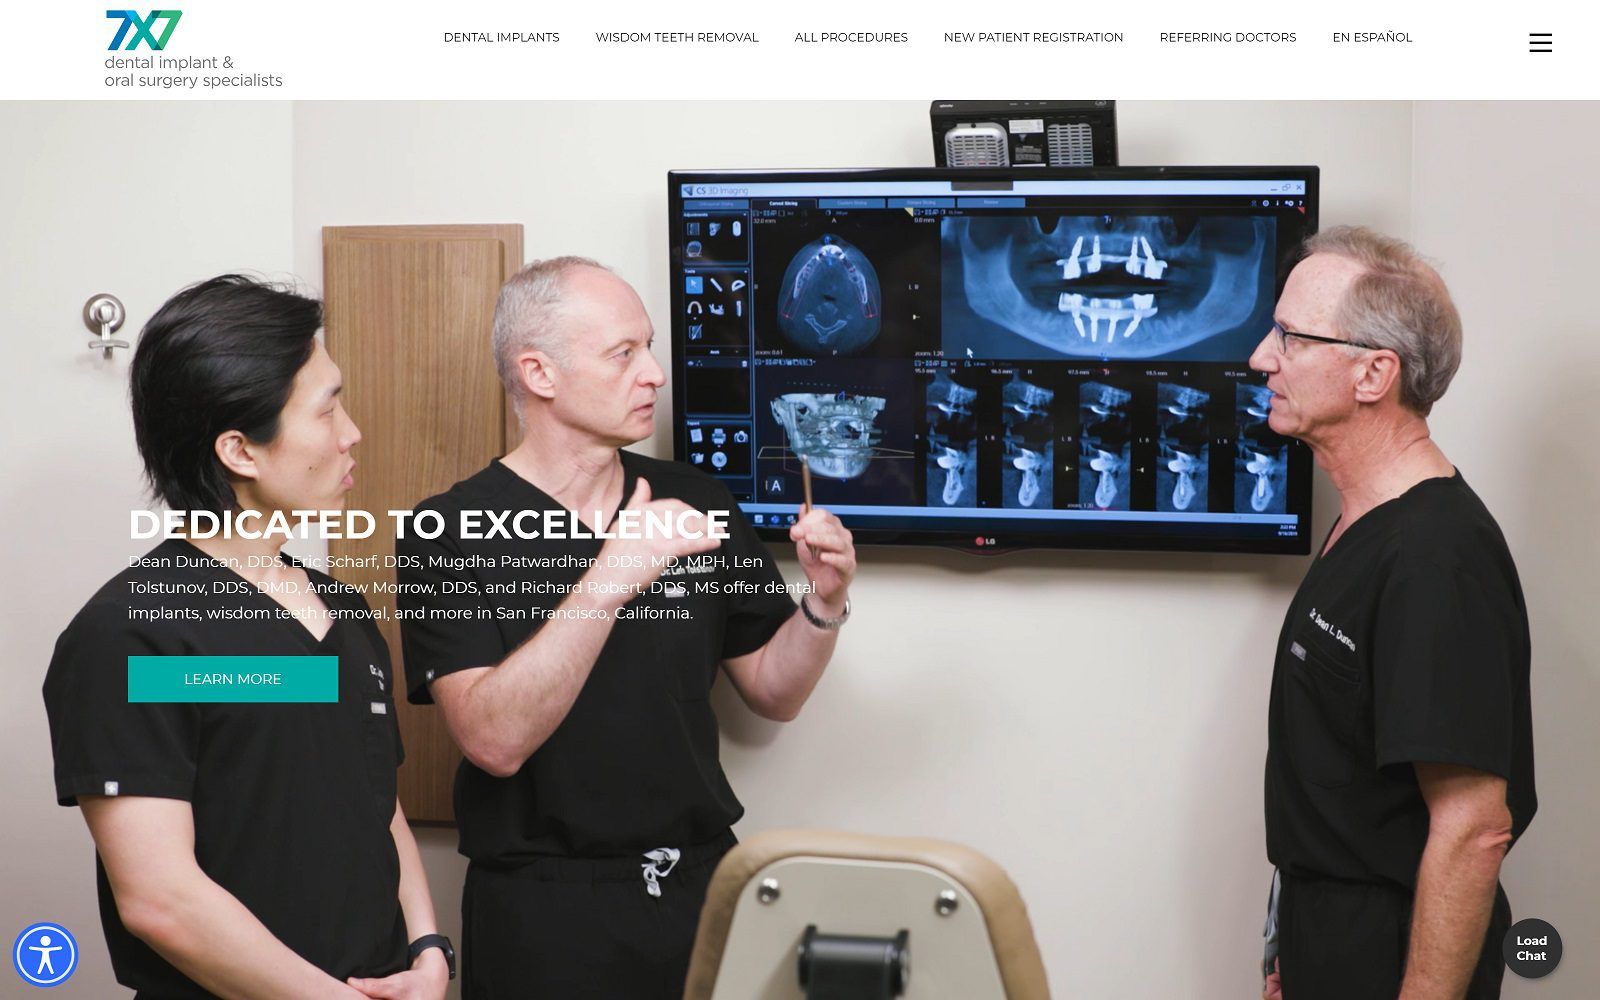 The screenshot of 7x7 dental implant & oral surgery specialists of san francisco website